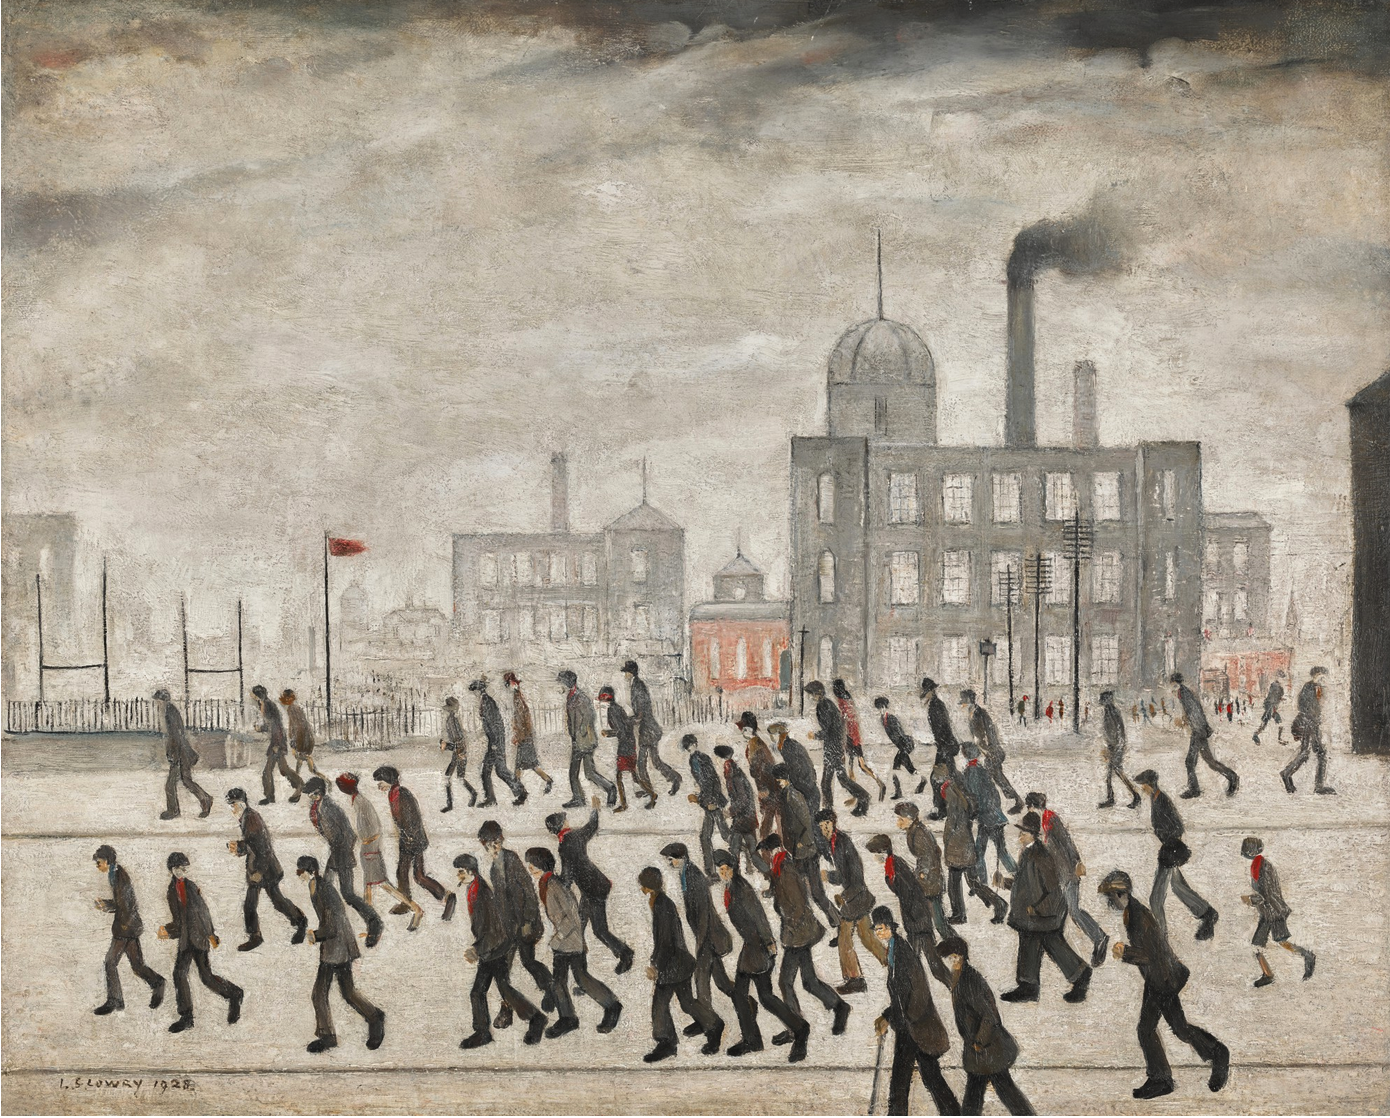 Going to the Match (1928) by Laurence Stephen Lowry (1887 - 1976), English artist.